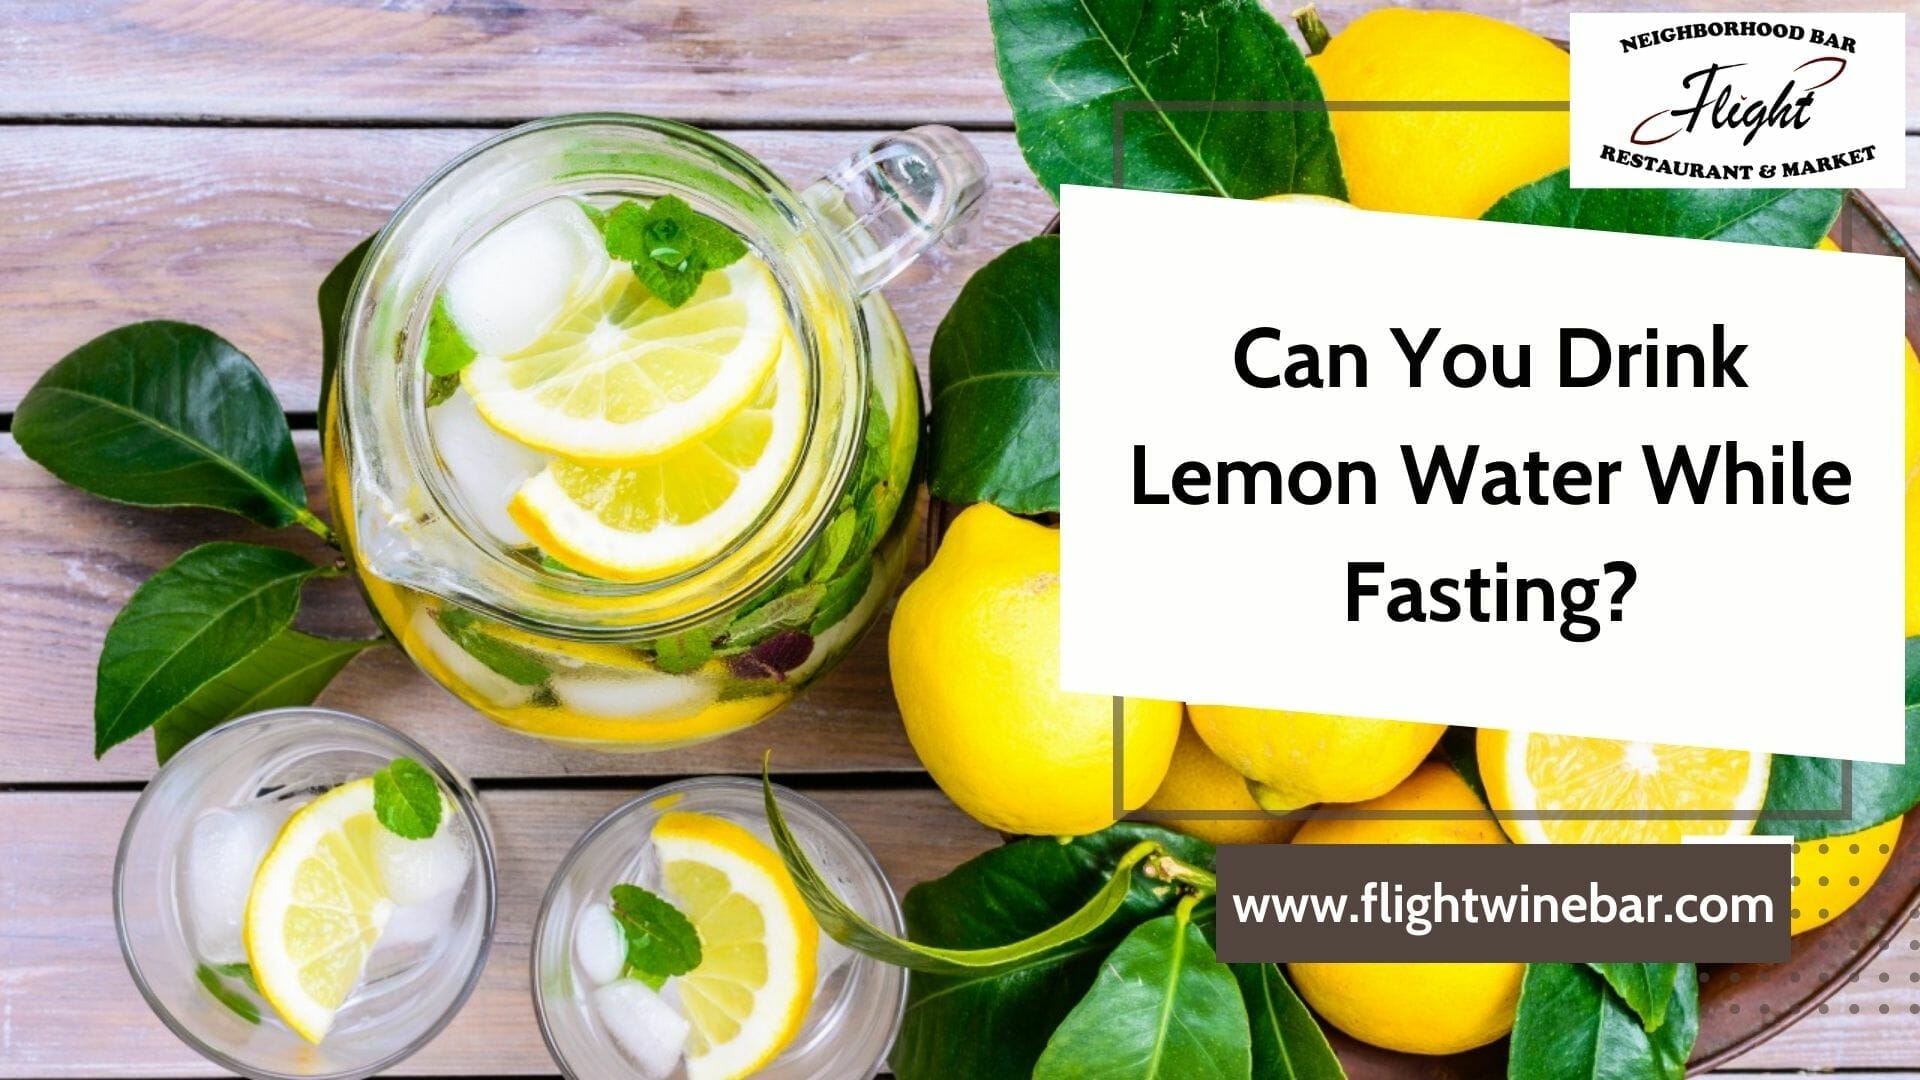 Can You Drink Lemon Water While Fasting